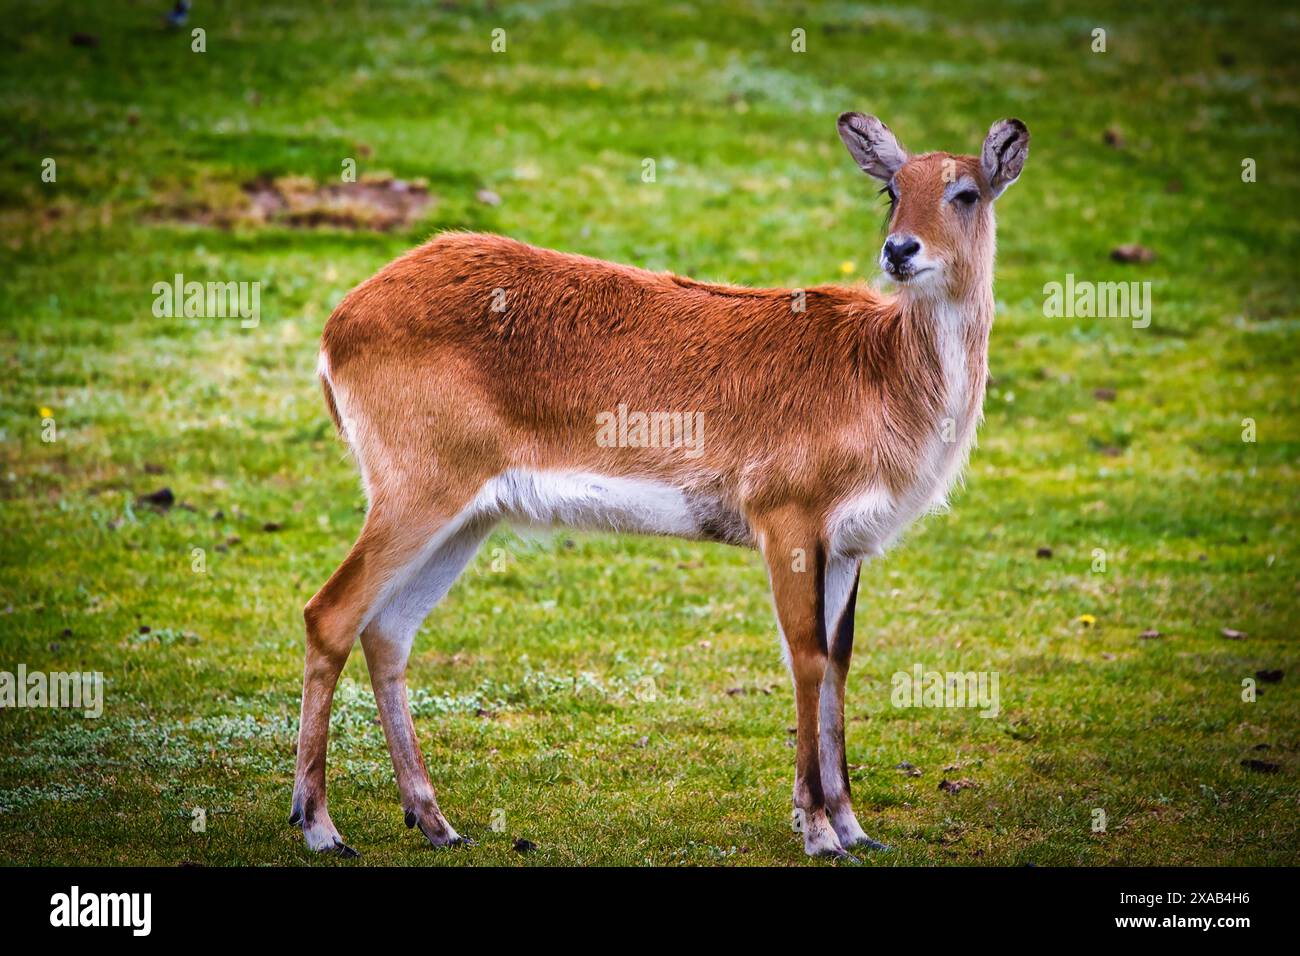 A young deer standing on a grassy field, looking alert and attentive. Stock Photo